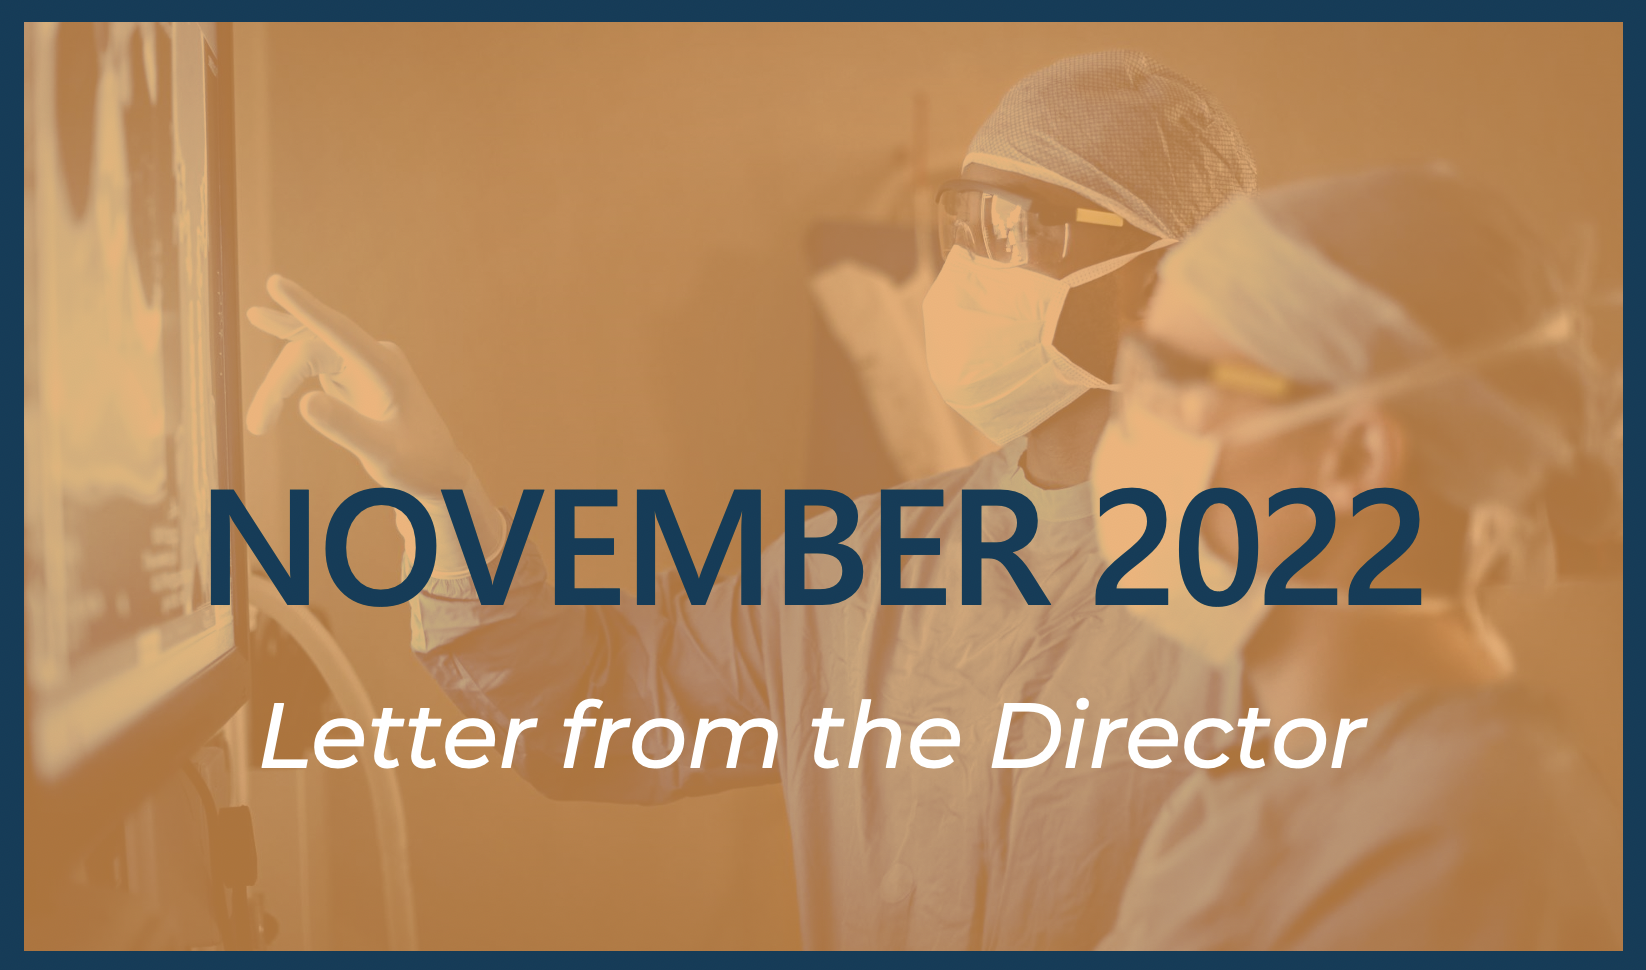 November 2022 Letter from the Director